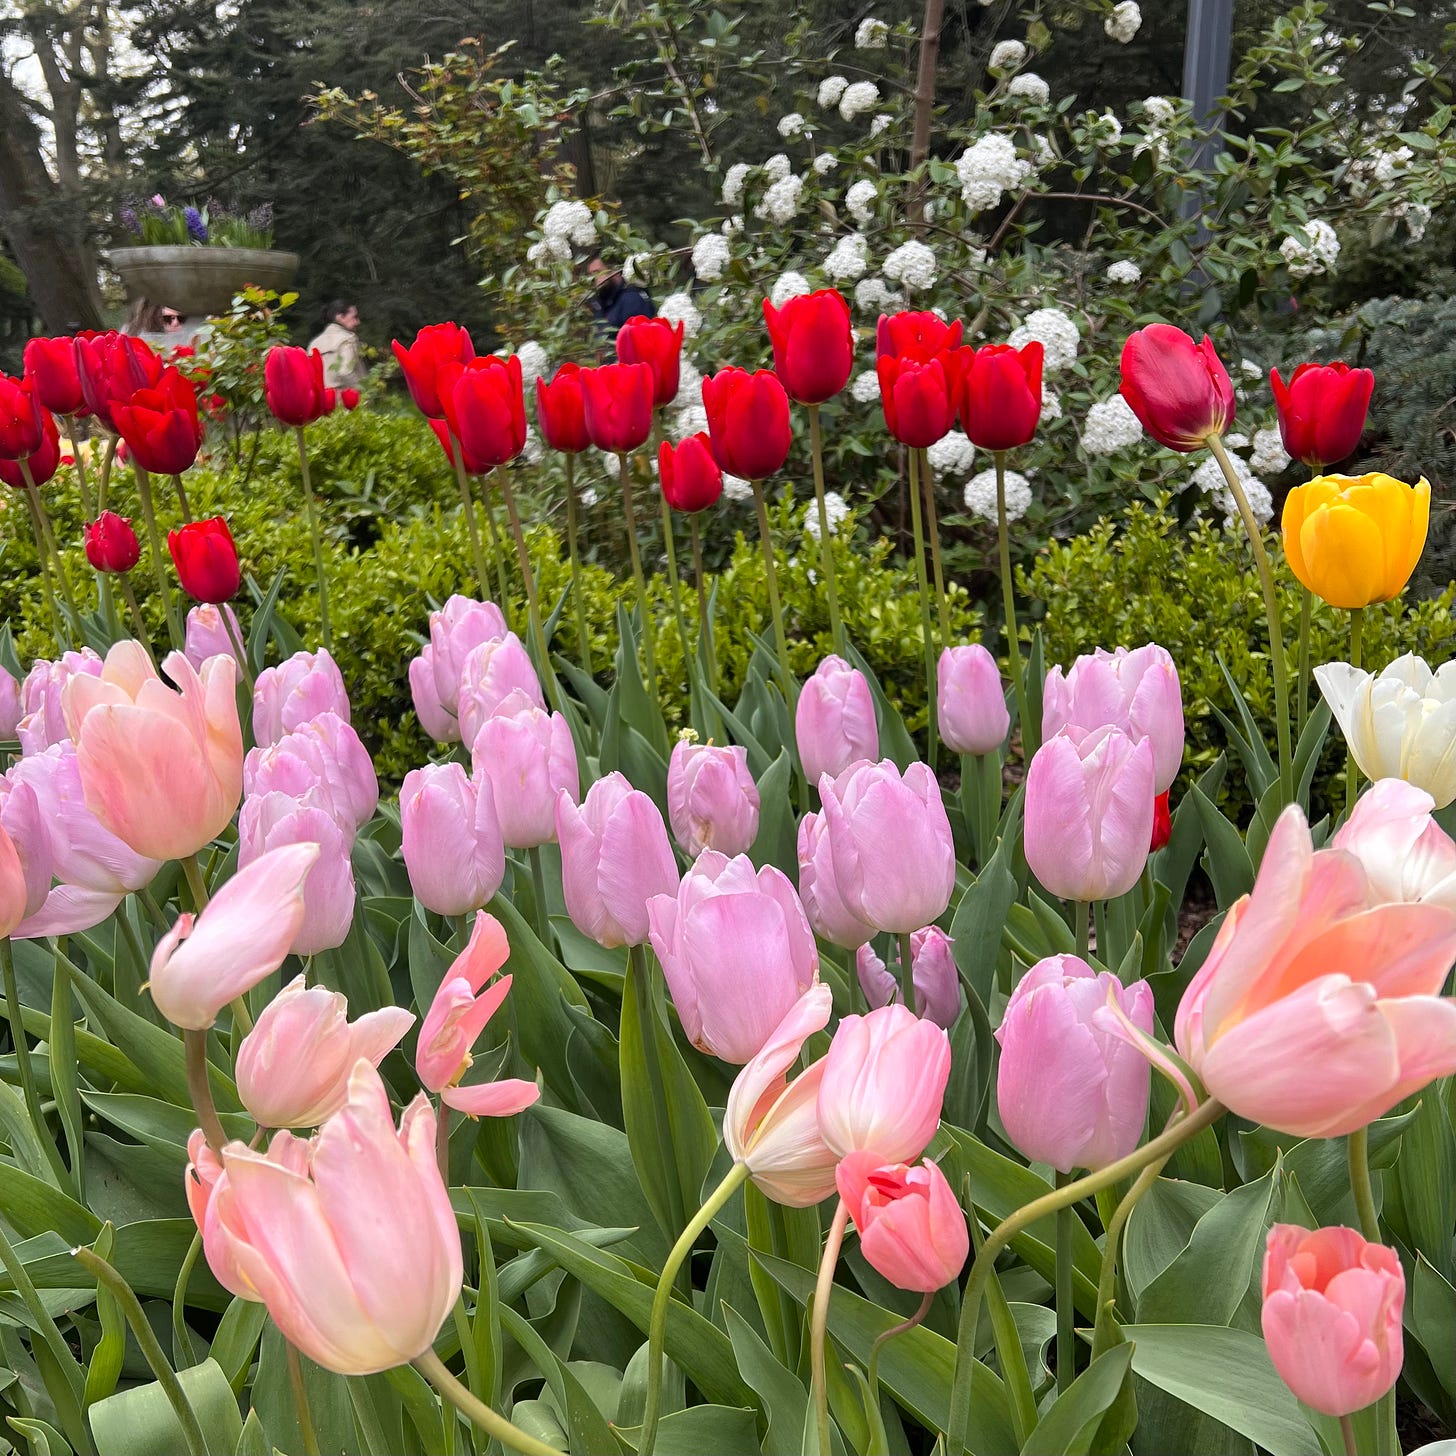 Tulips in many colors at the Brooklyn Botanic Garden